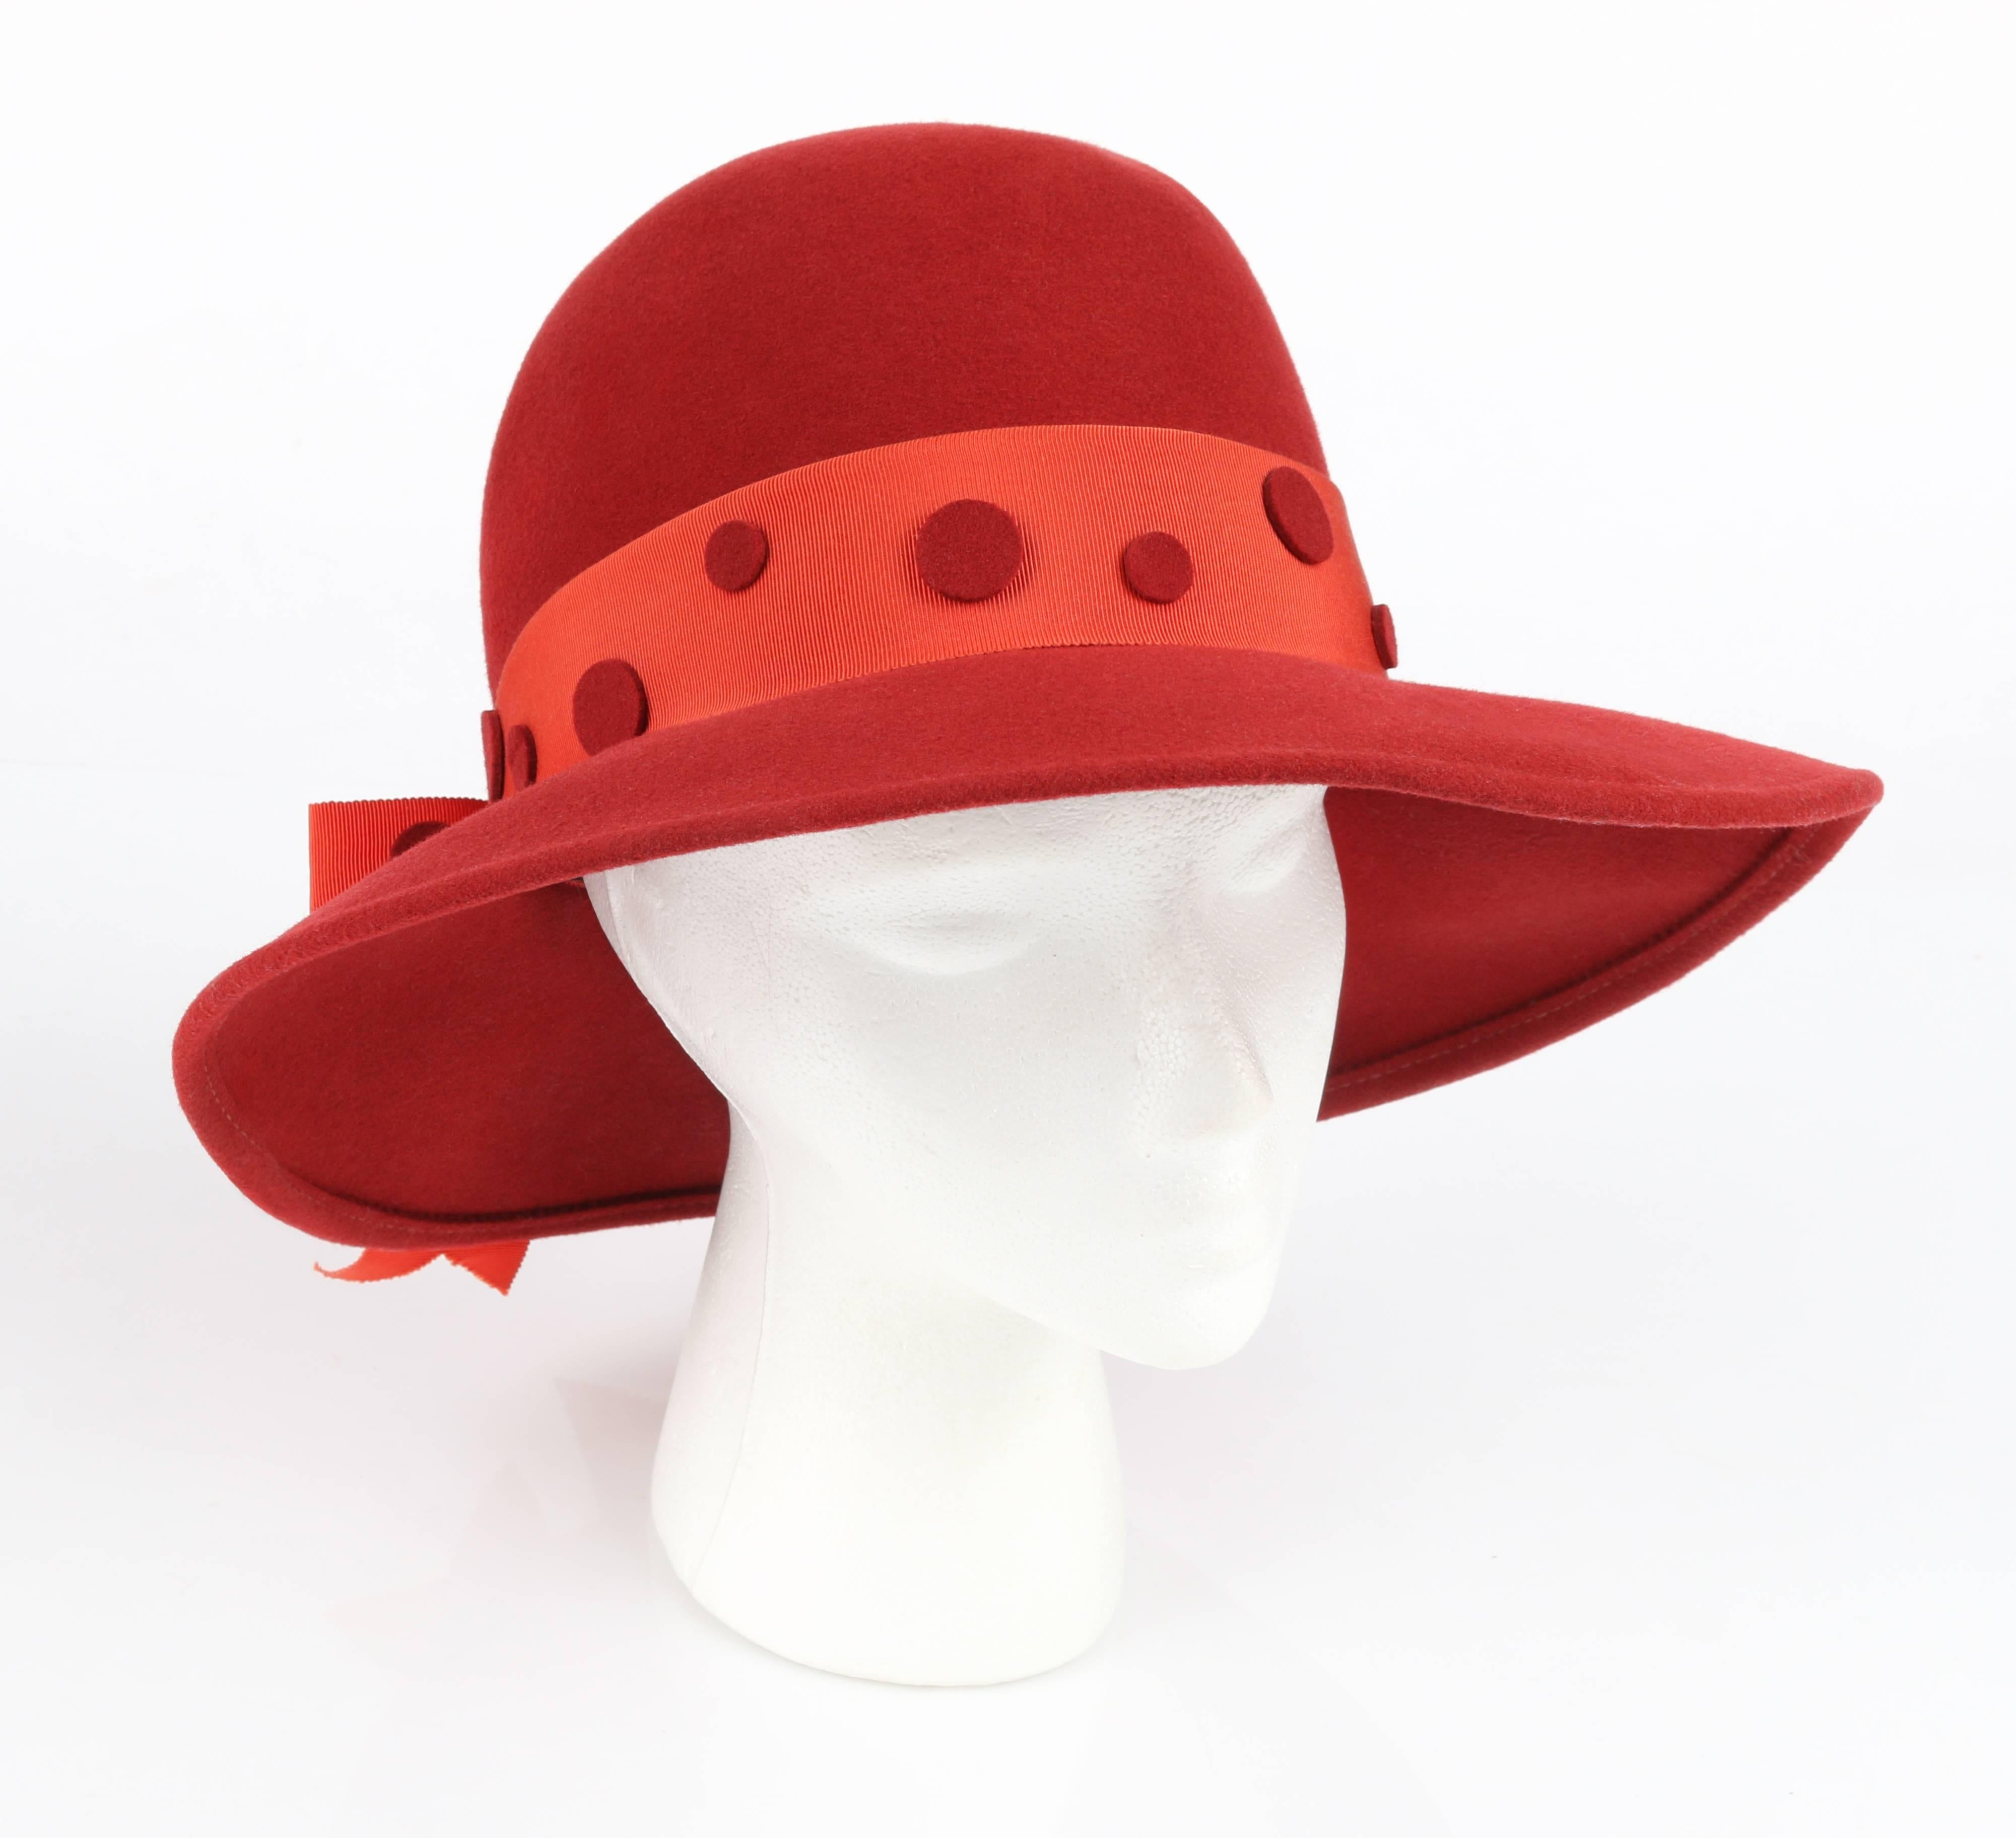 Vintage Pierre Cardin c.1960's red wool felt mod fedora style hat. Wide turned down brim. Orange grosgrain ribbon hat band with large v-tailed bow at back. Various sized red wool felt polka dot detail along hat band. Unlined. Red grosgrain ribbon